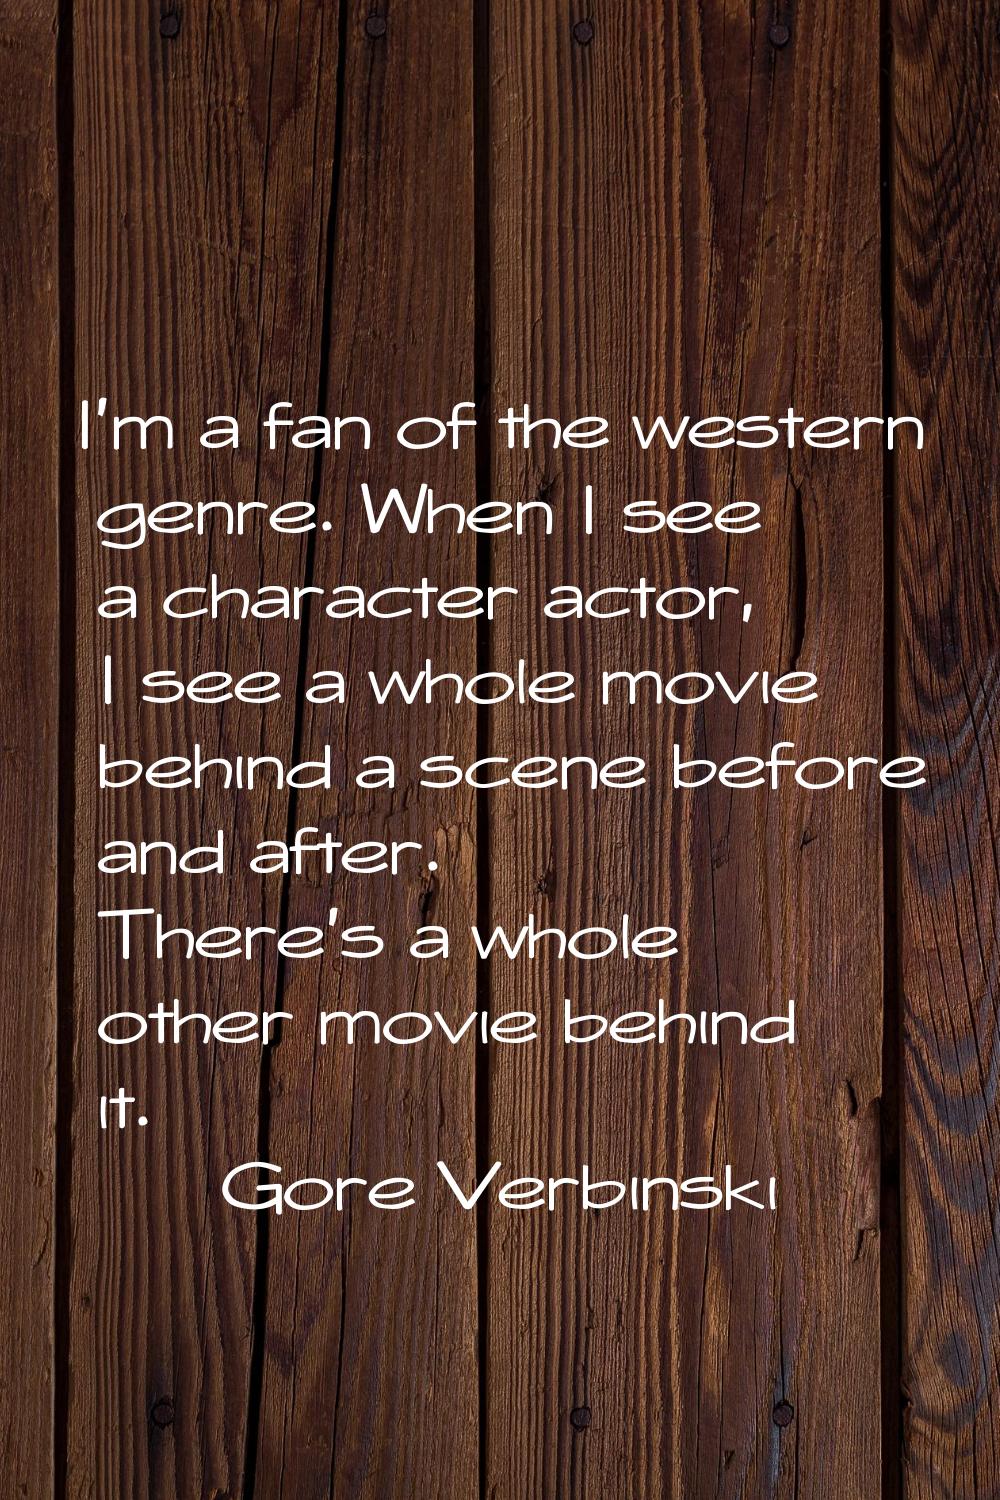 I'm a fan of the western genre. When I see a character actor, I see a whole movie behind a scene be